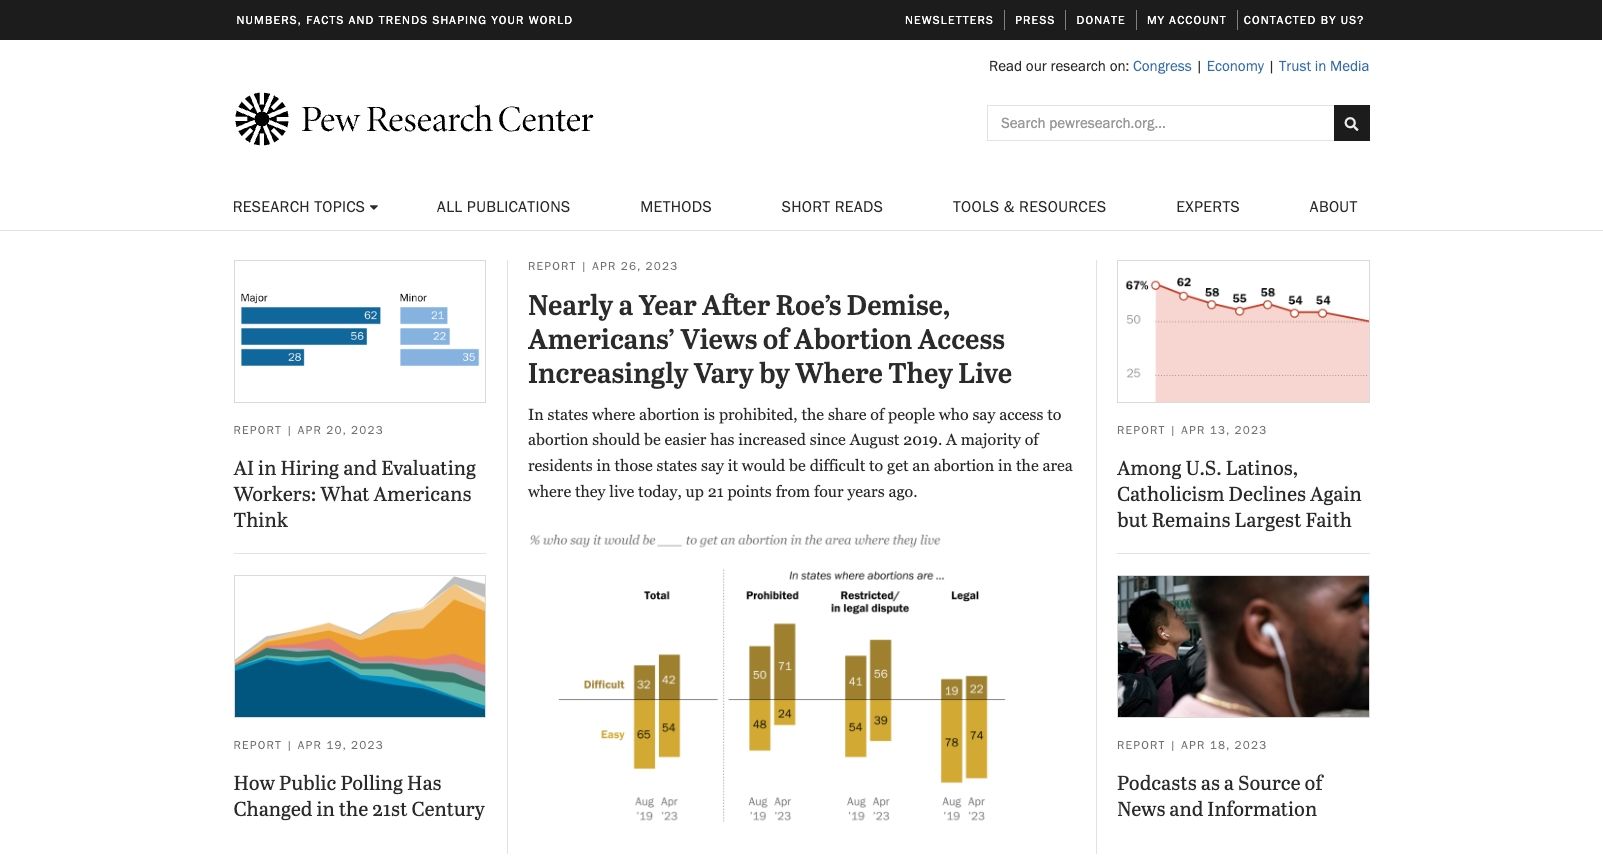 The Pew Research Center website homepage